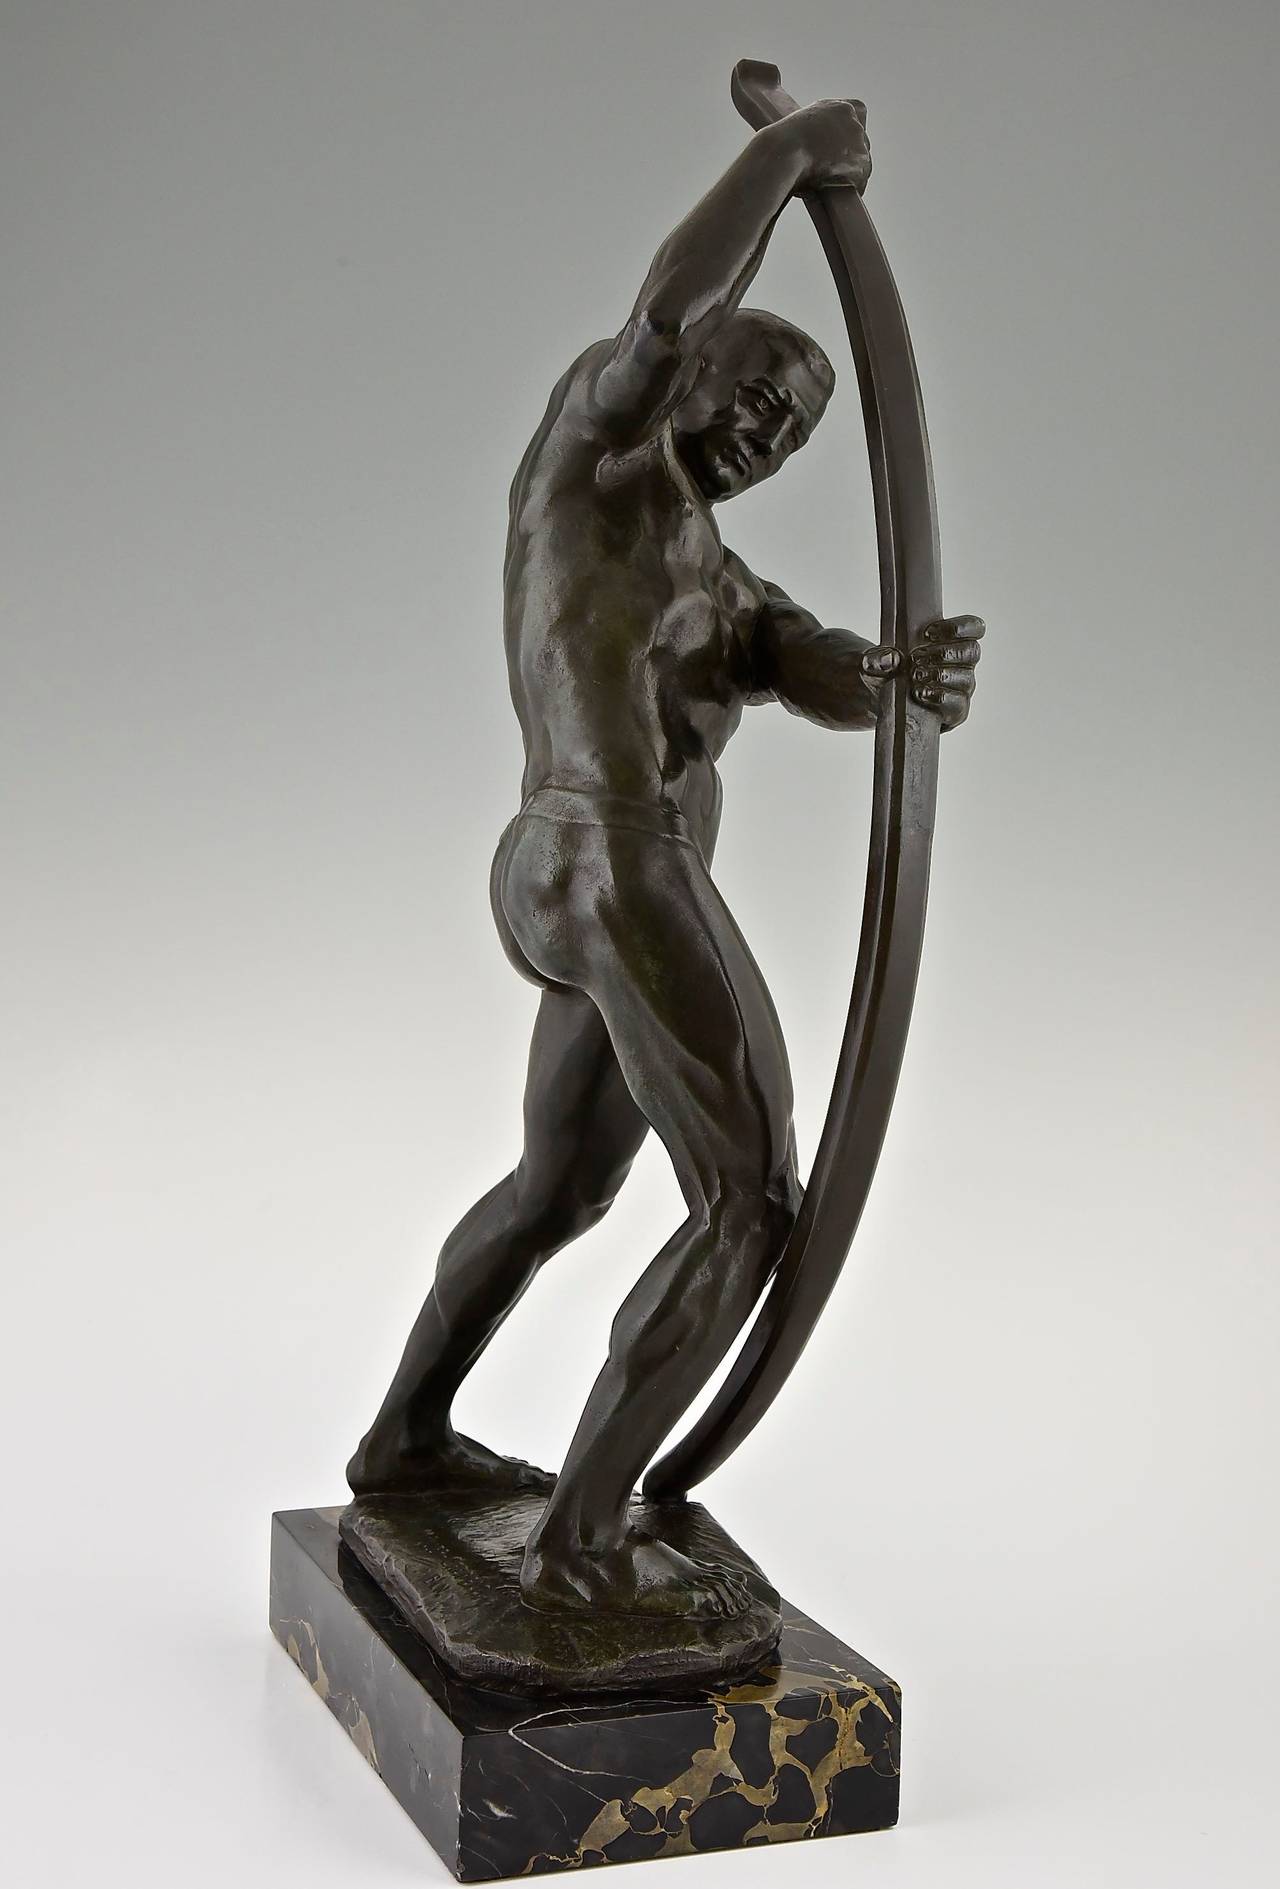 20th Century Art Deco Bronze Sculpture Male Nude with Bow by Muller Crefeld, 1920